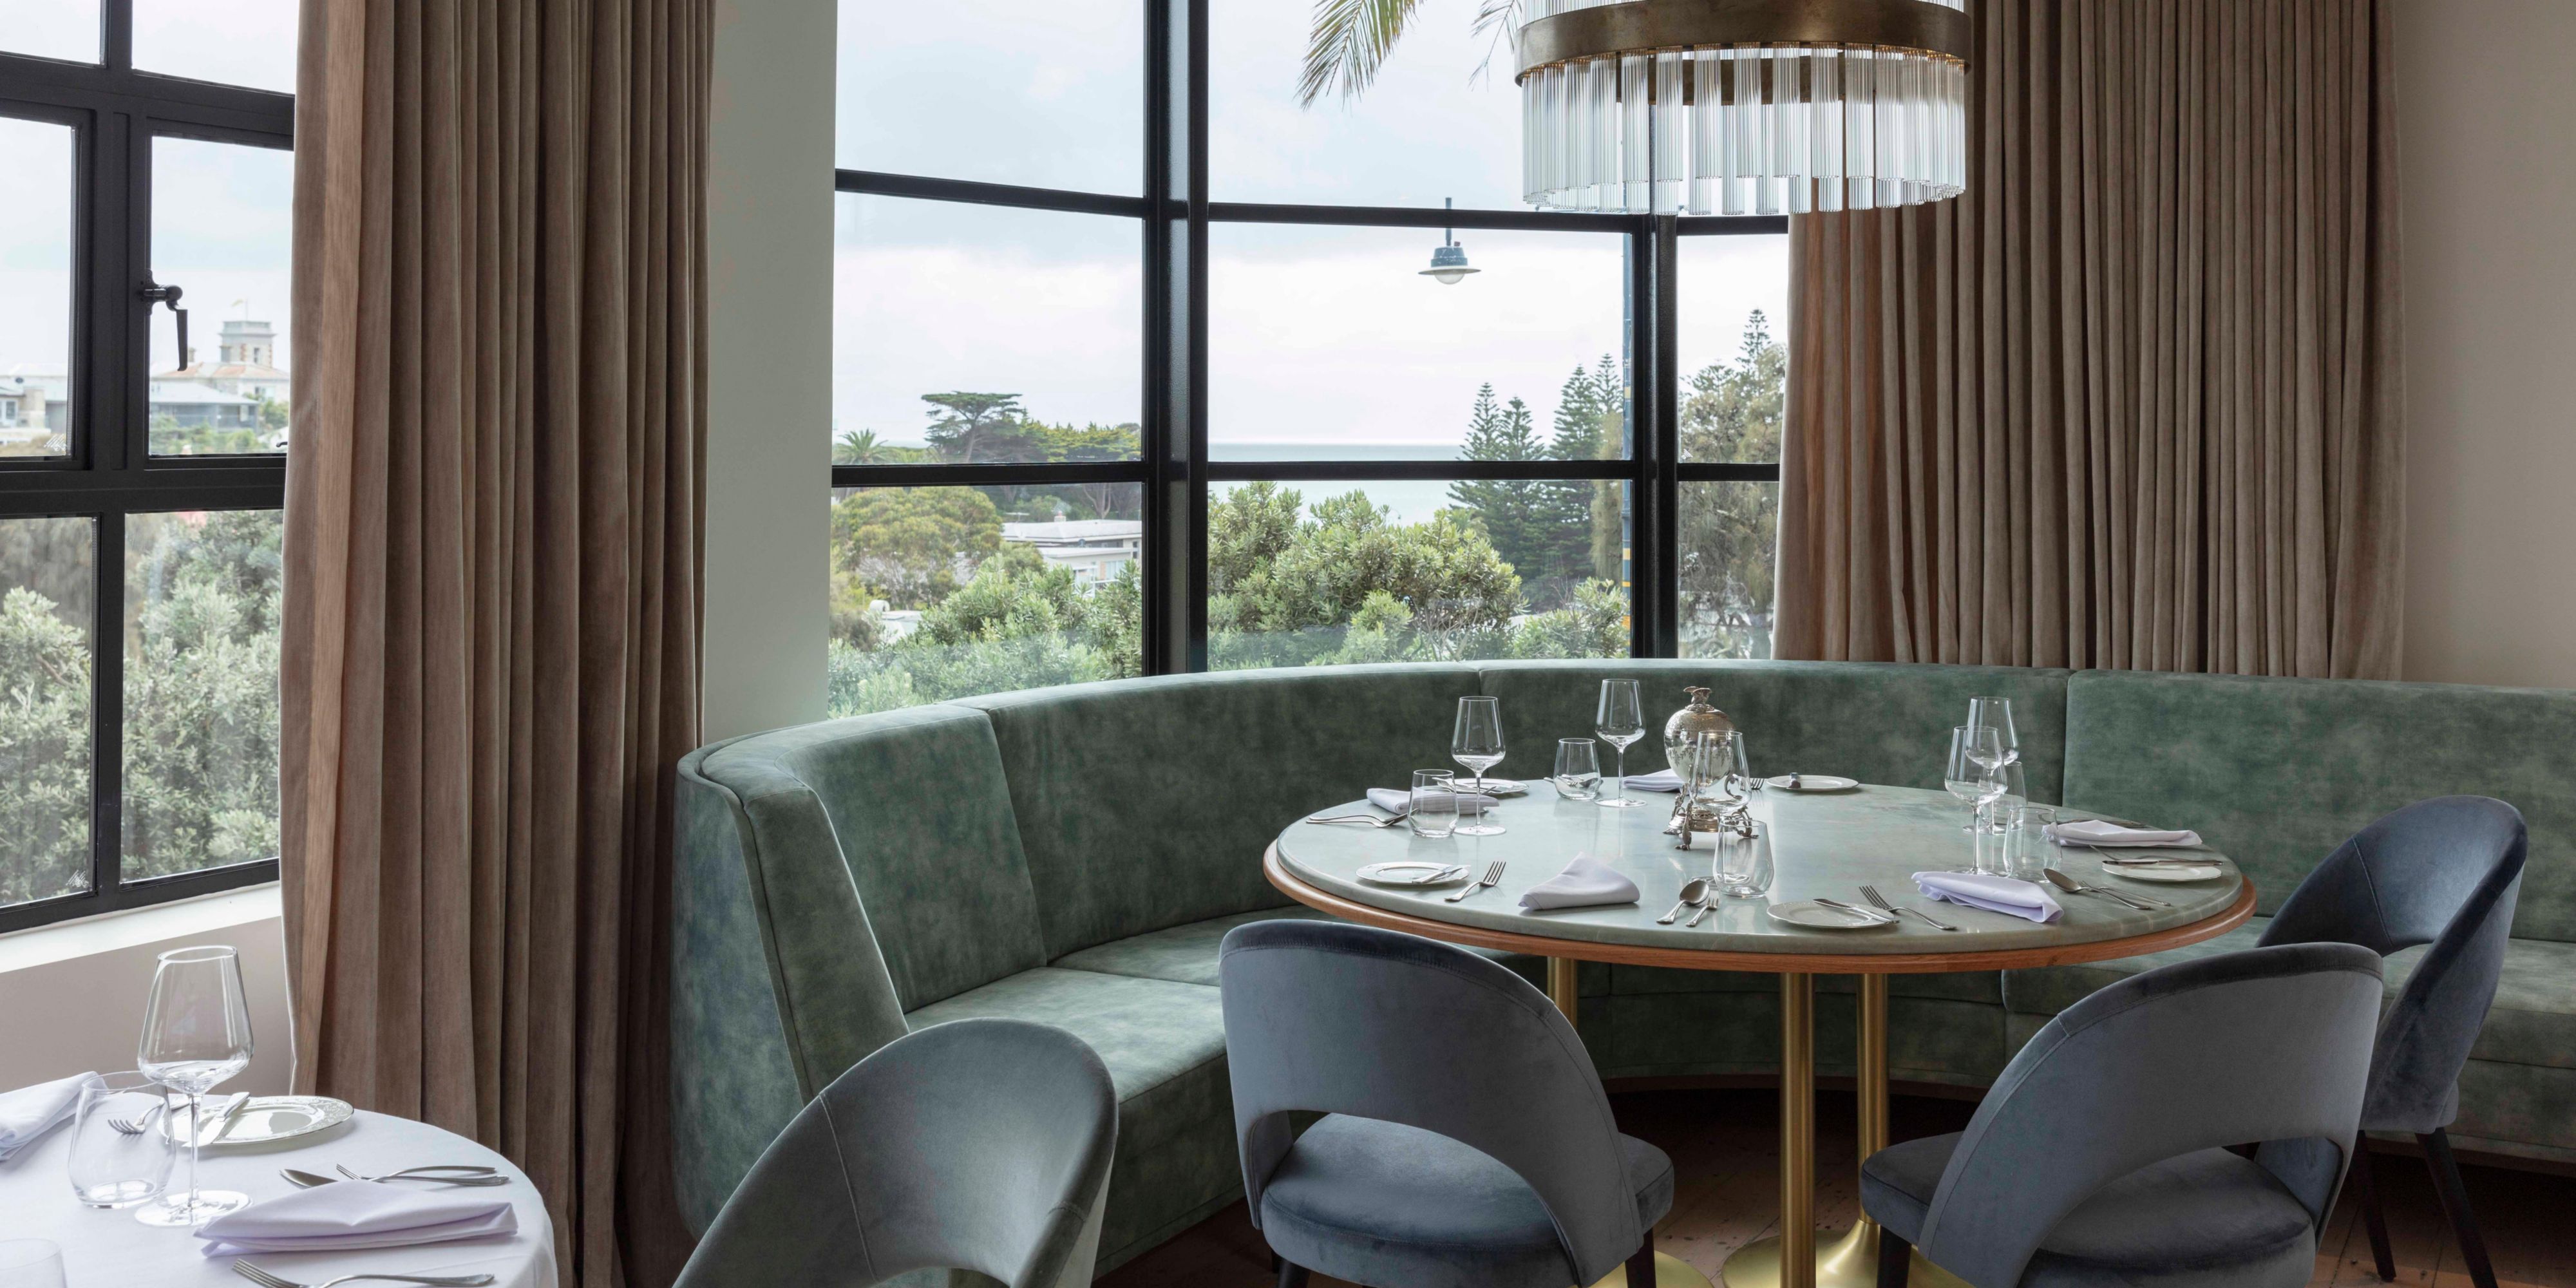 Experience elevated dining with ocean views, à la carte meals in vibrant, sun-lit spaces, laid-back al fresco feasts, and delicious wood-fired pizzas. A local icon since 1875, the hotel and its five distinct dining options are inspired by its coastal destination and Mediterranean charm. 